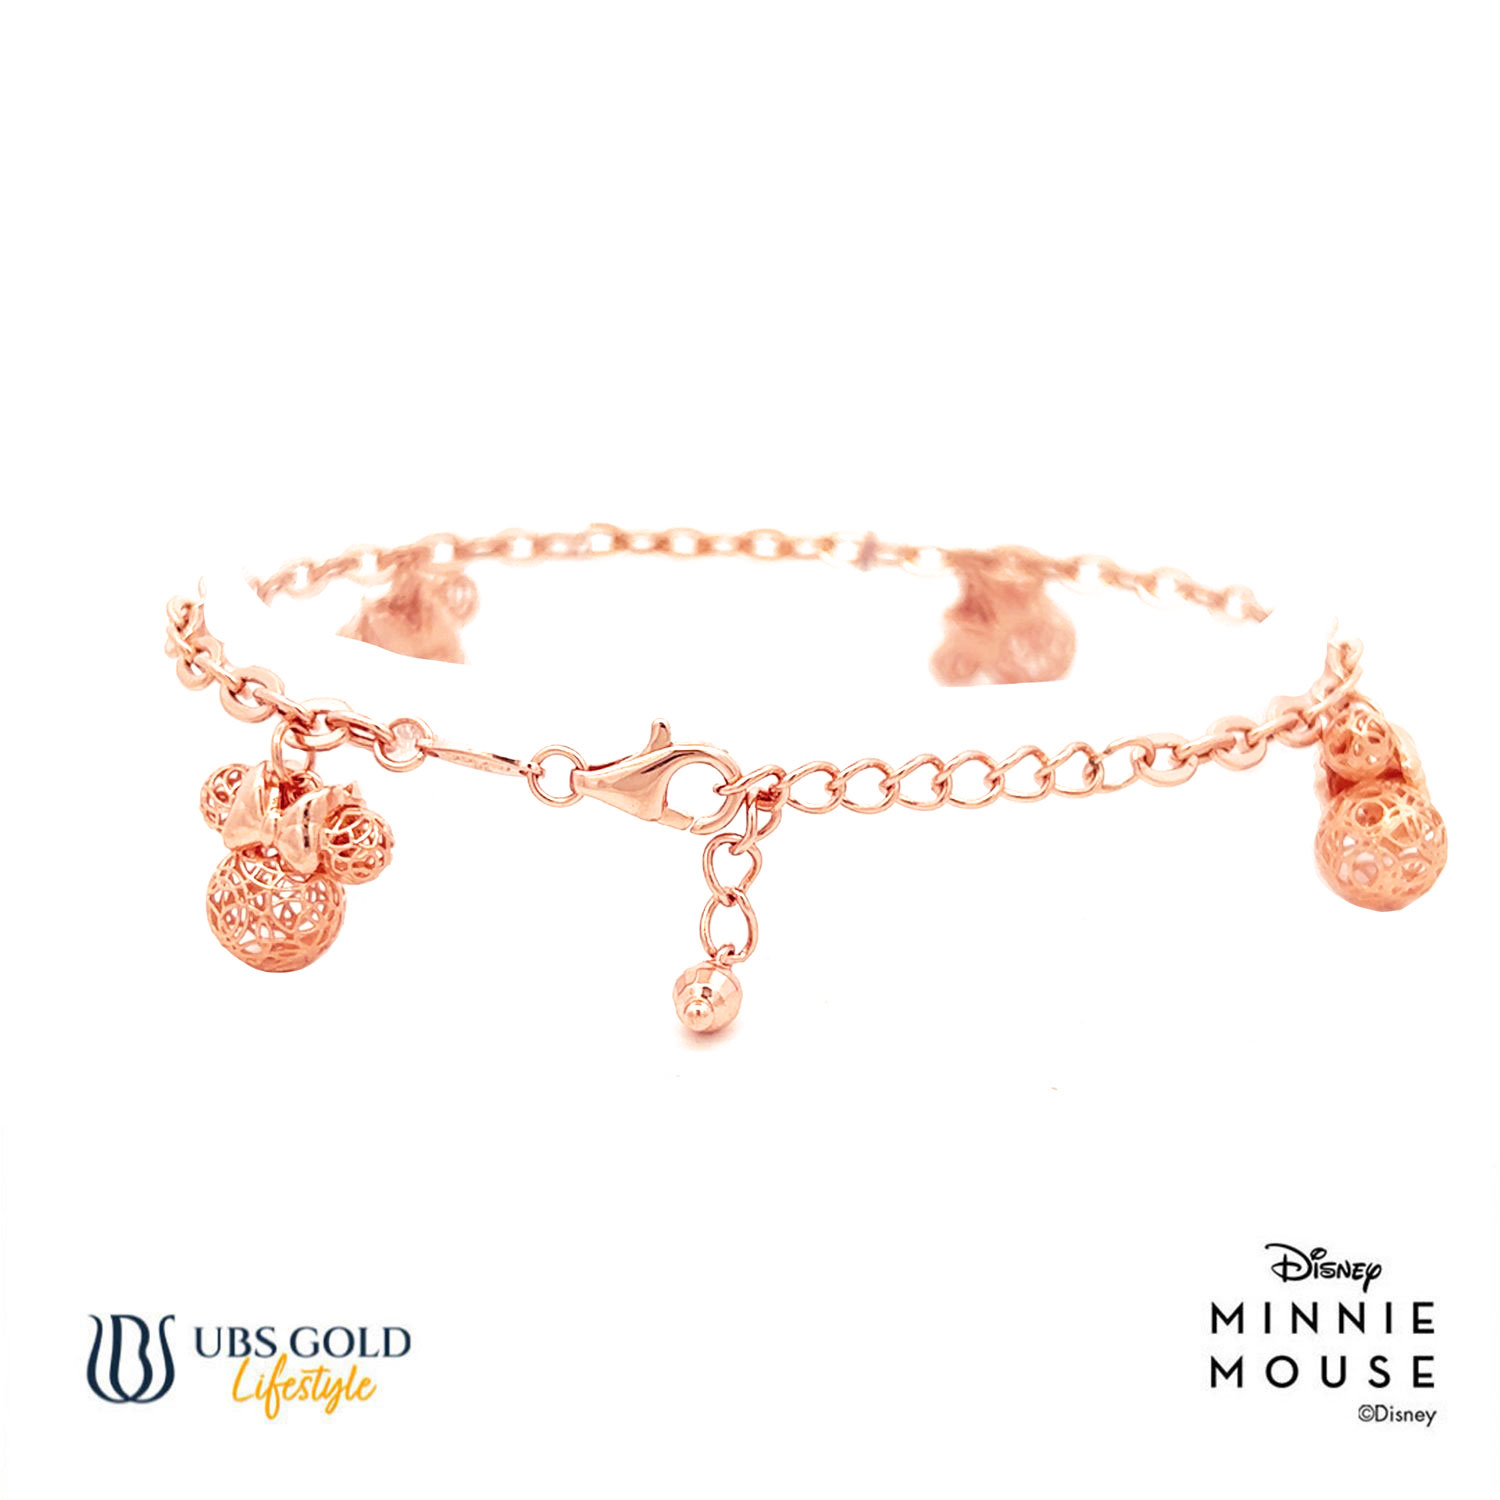 UBS Gold Gelang Emas Disney Minnie Mouse - Hgy0148 - 17K